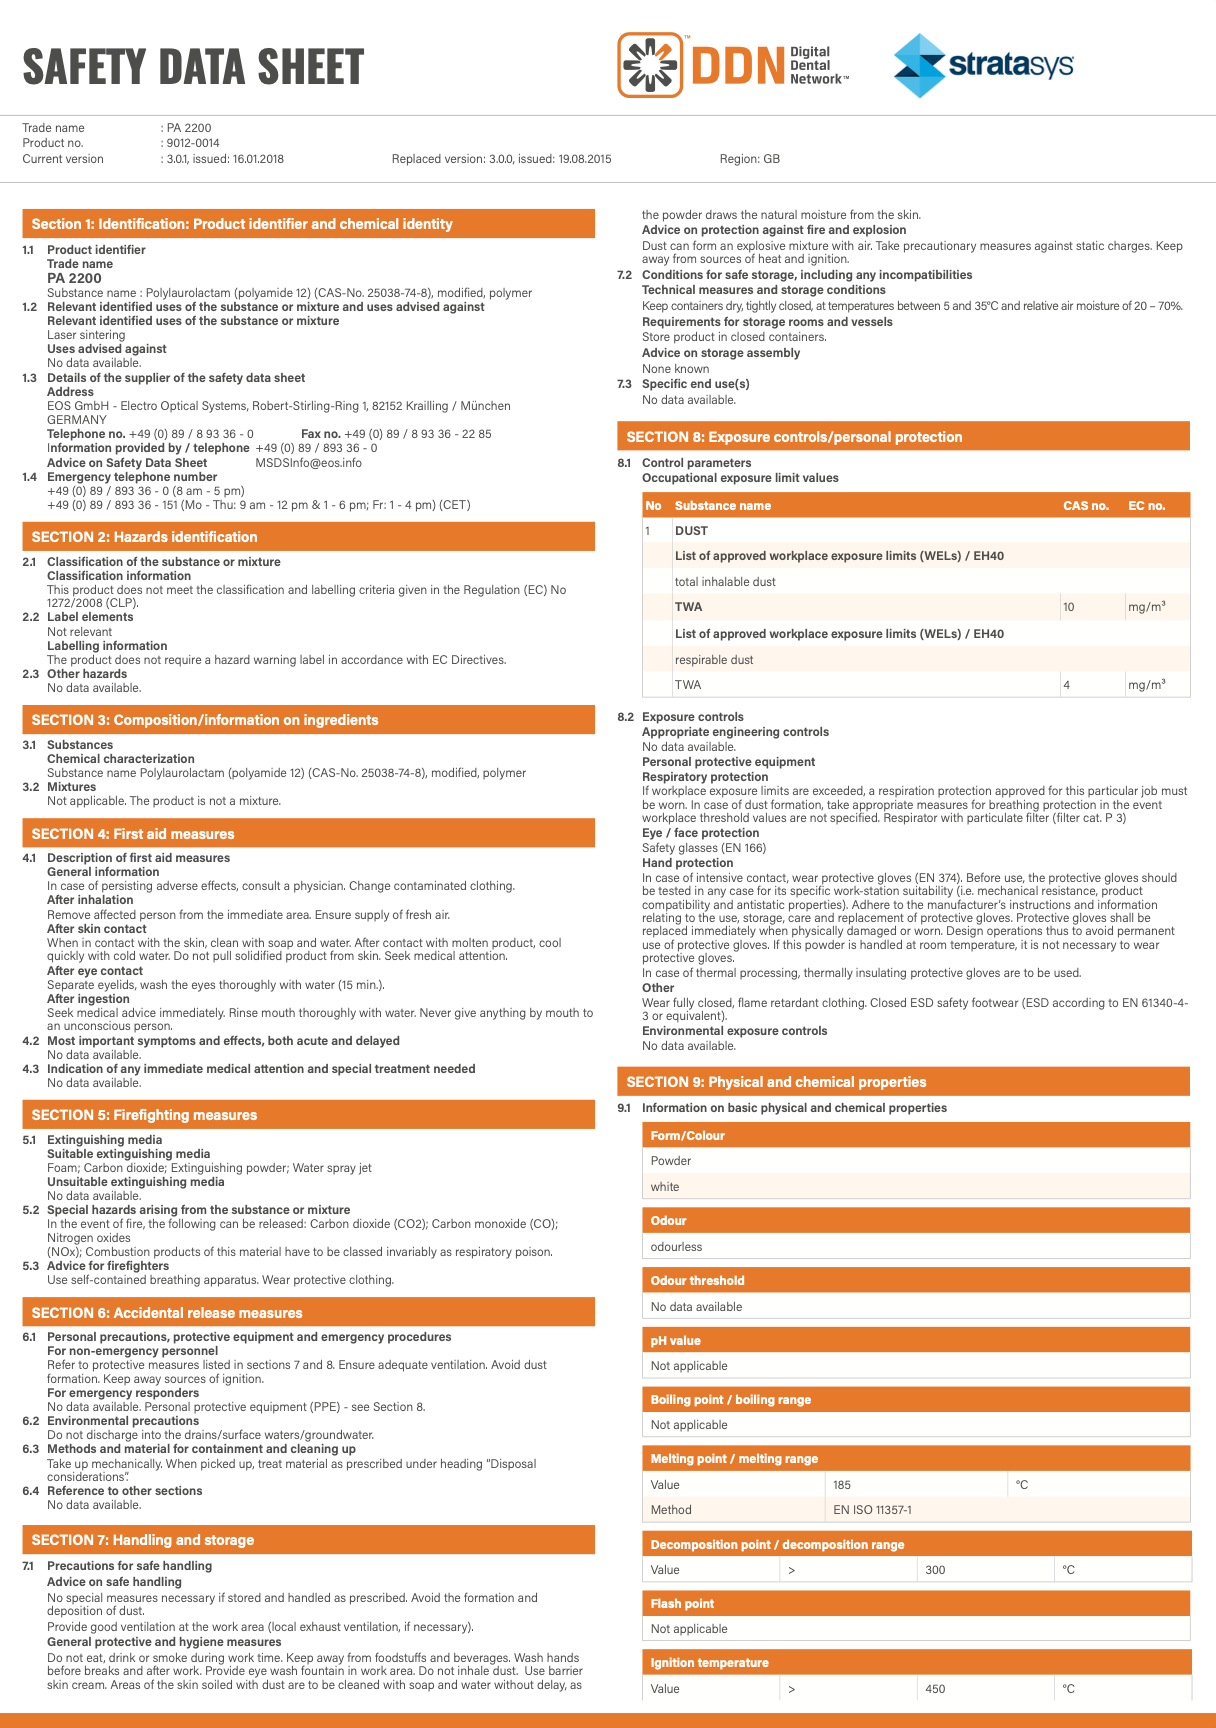 DDNGUIDE: BioModel PA2200 Safety Data Sheet